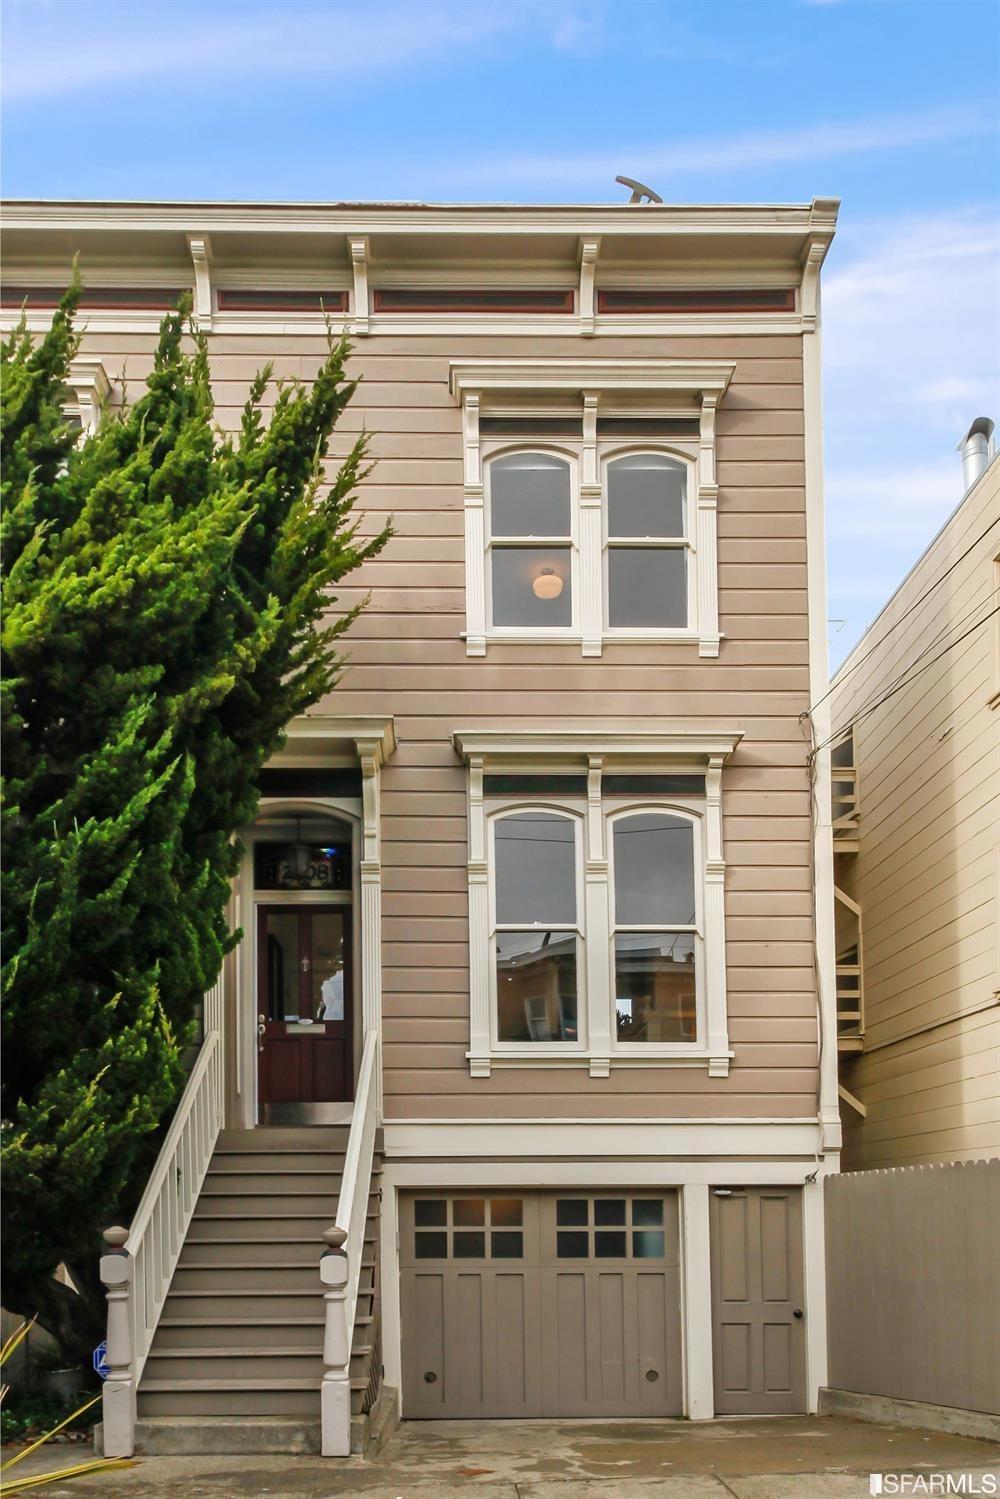 Semi-detached Victorian row house on a quiet, tree-lined Cow Hollow street.